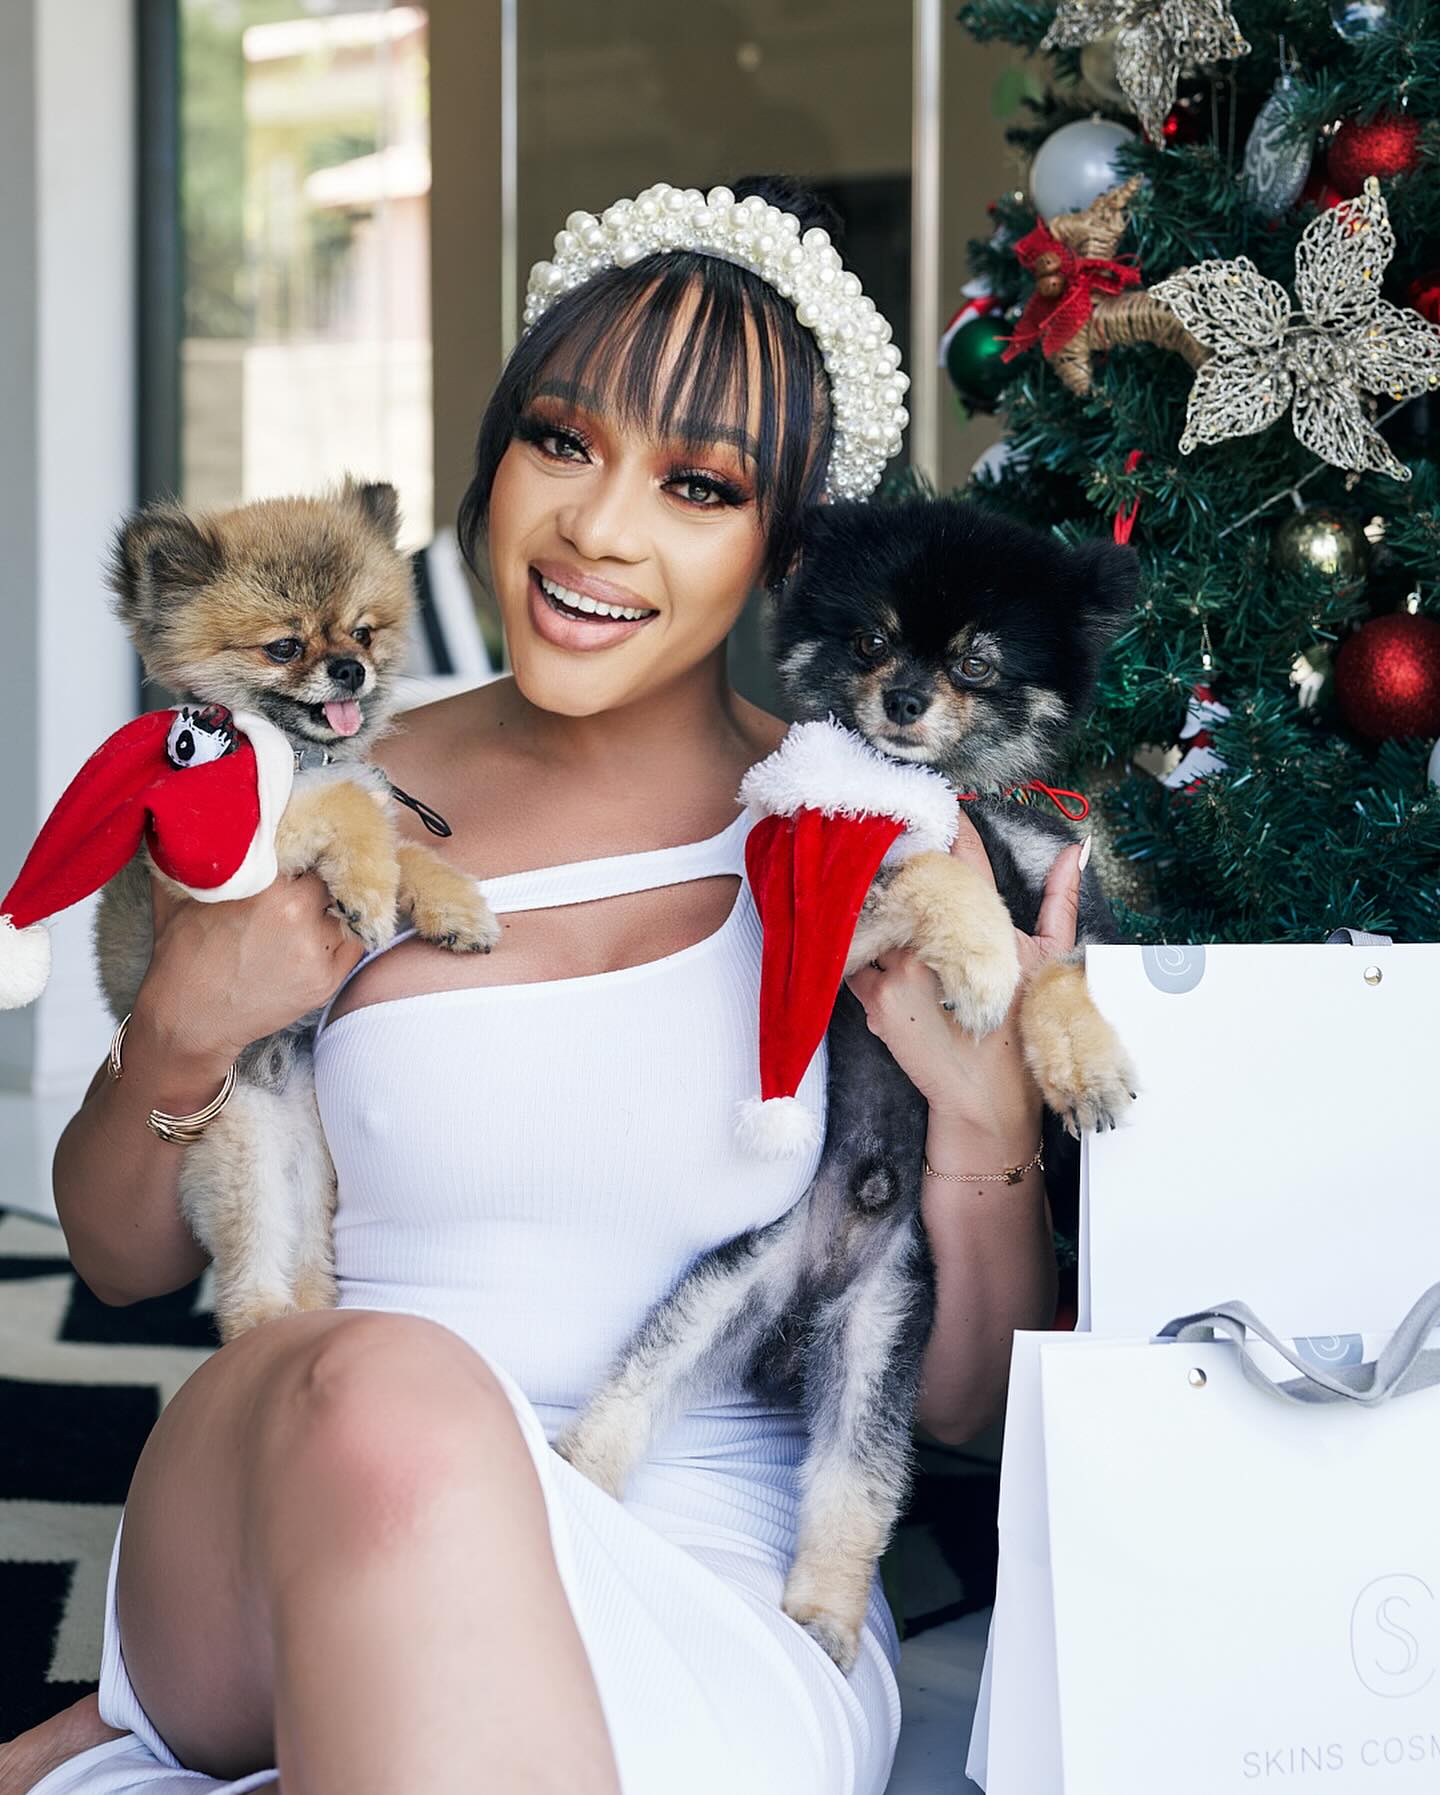 Thando Thabethe assures that her reality show will not bring any drama. 38